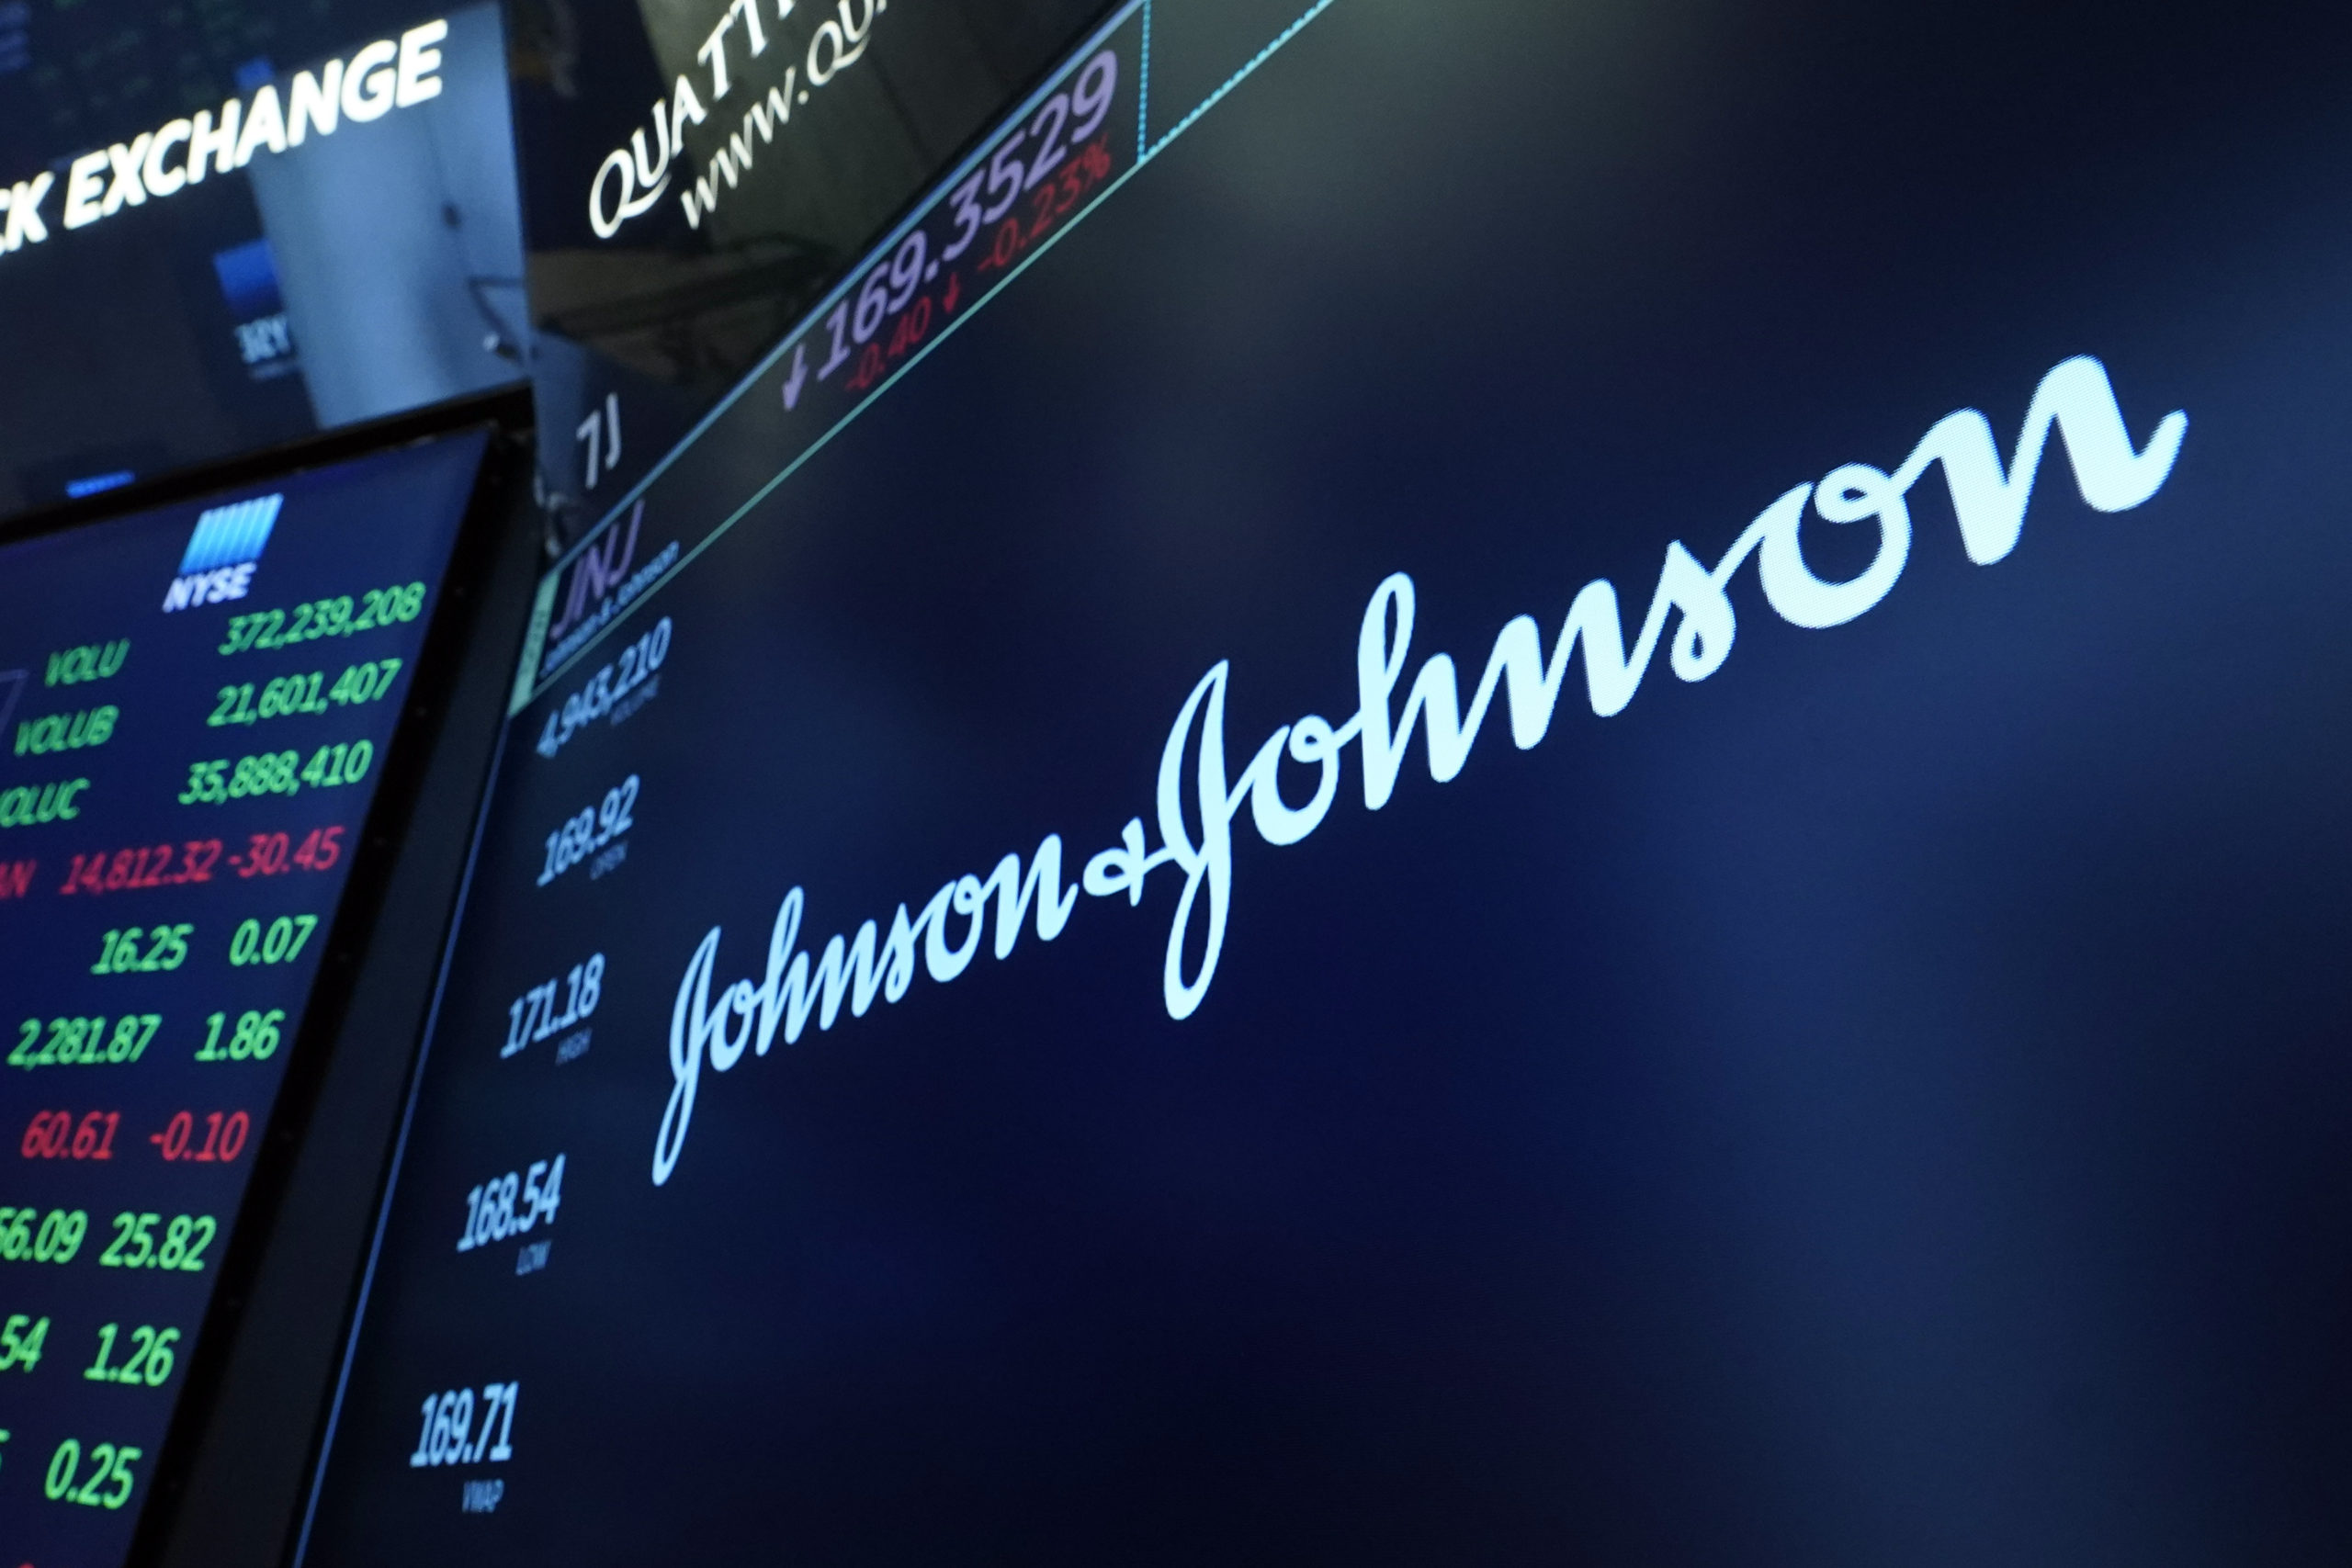 The Johnson & Johnson logo appears above a trading post on the floor of the New York Stock Exchange in New York City on July 21, 2021.